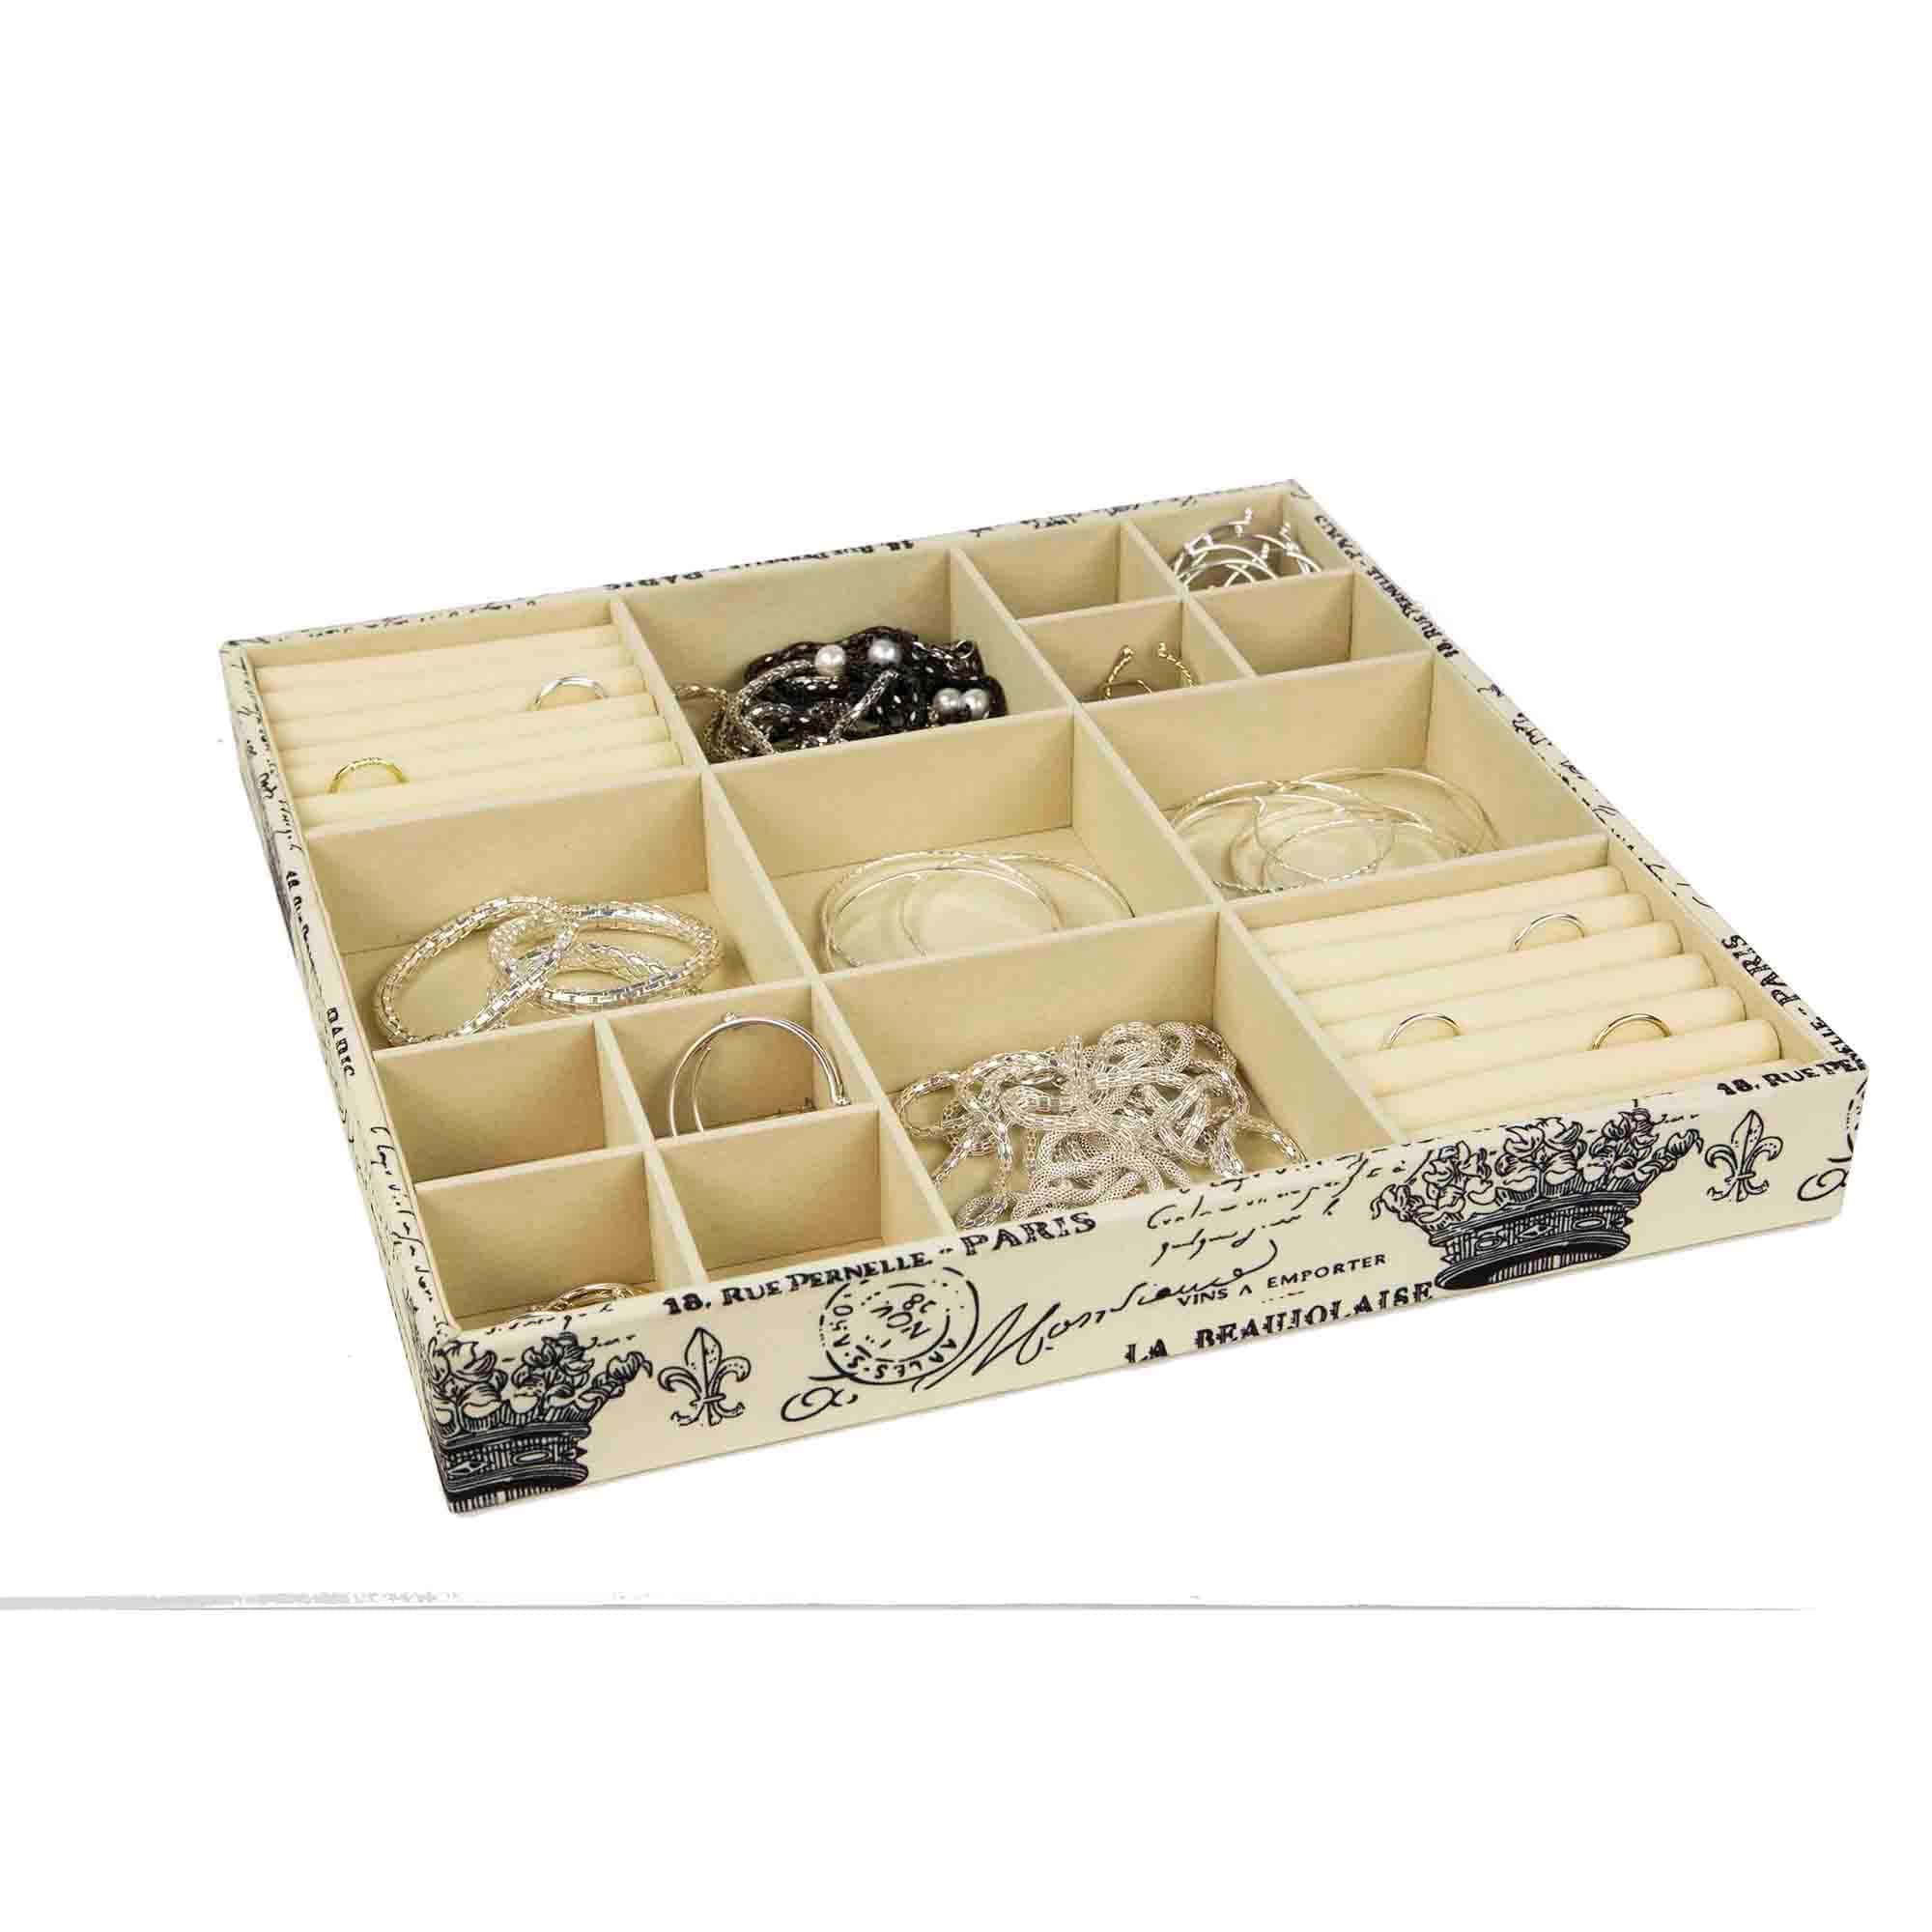 Home Basics Faux Leather 18 Compartment Jewelry Organizer $12 EACH, CASE PACK OF 6